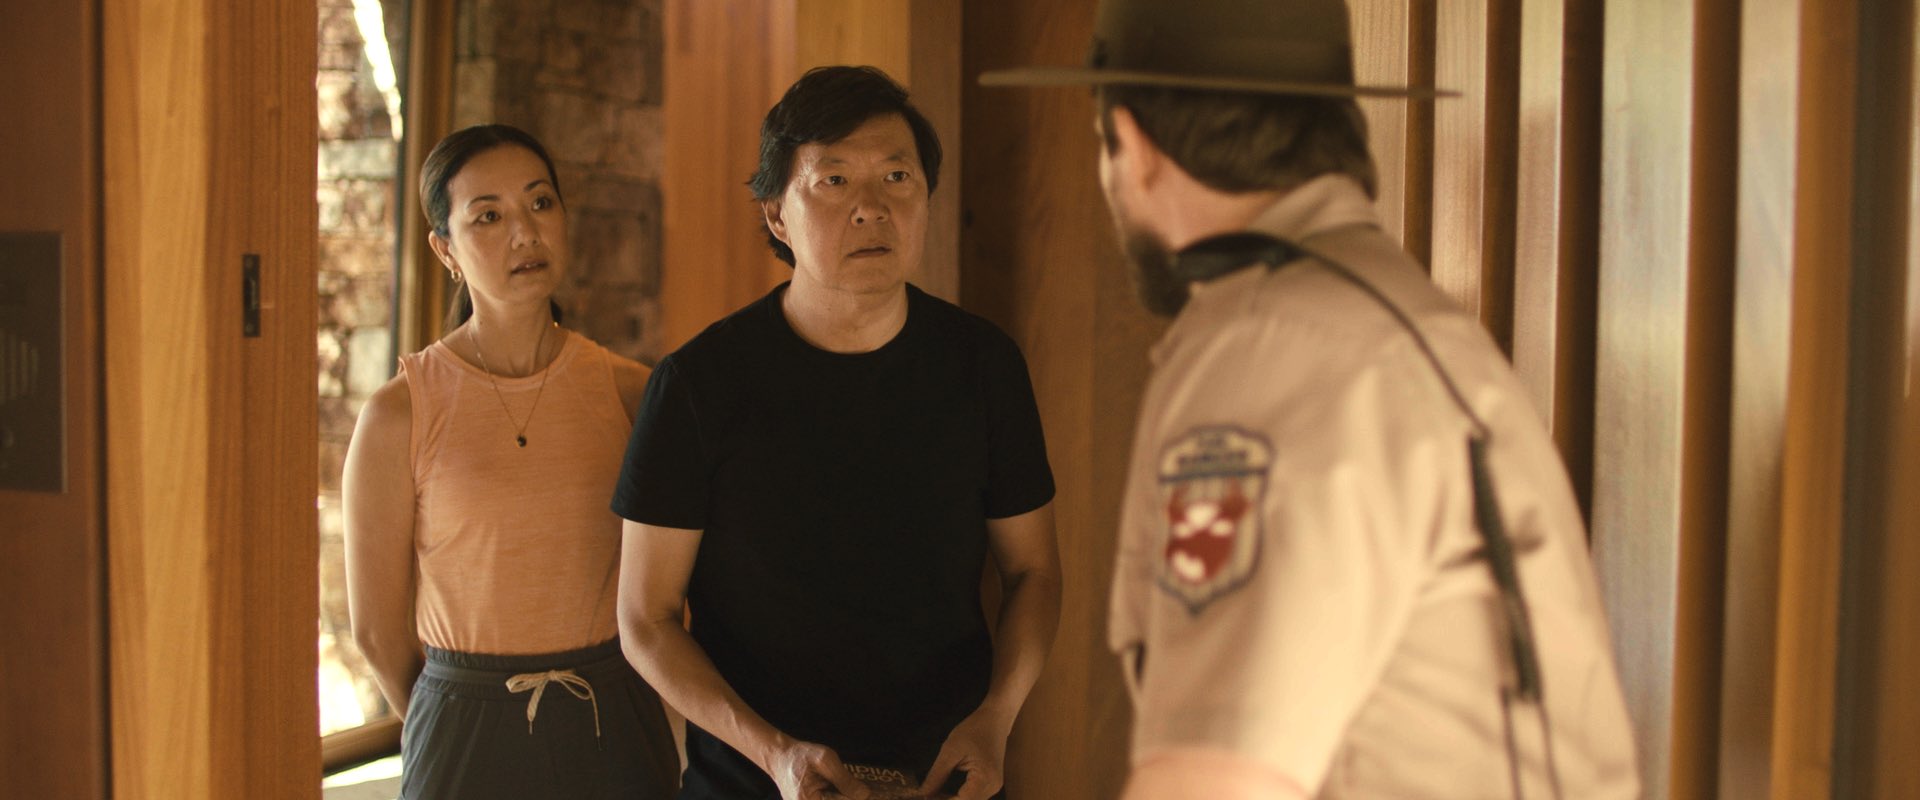 Ken Jeong and Jae Suh Park in a still from A Great Divide. (Photo Credit: Jeff Yang / Twitter)